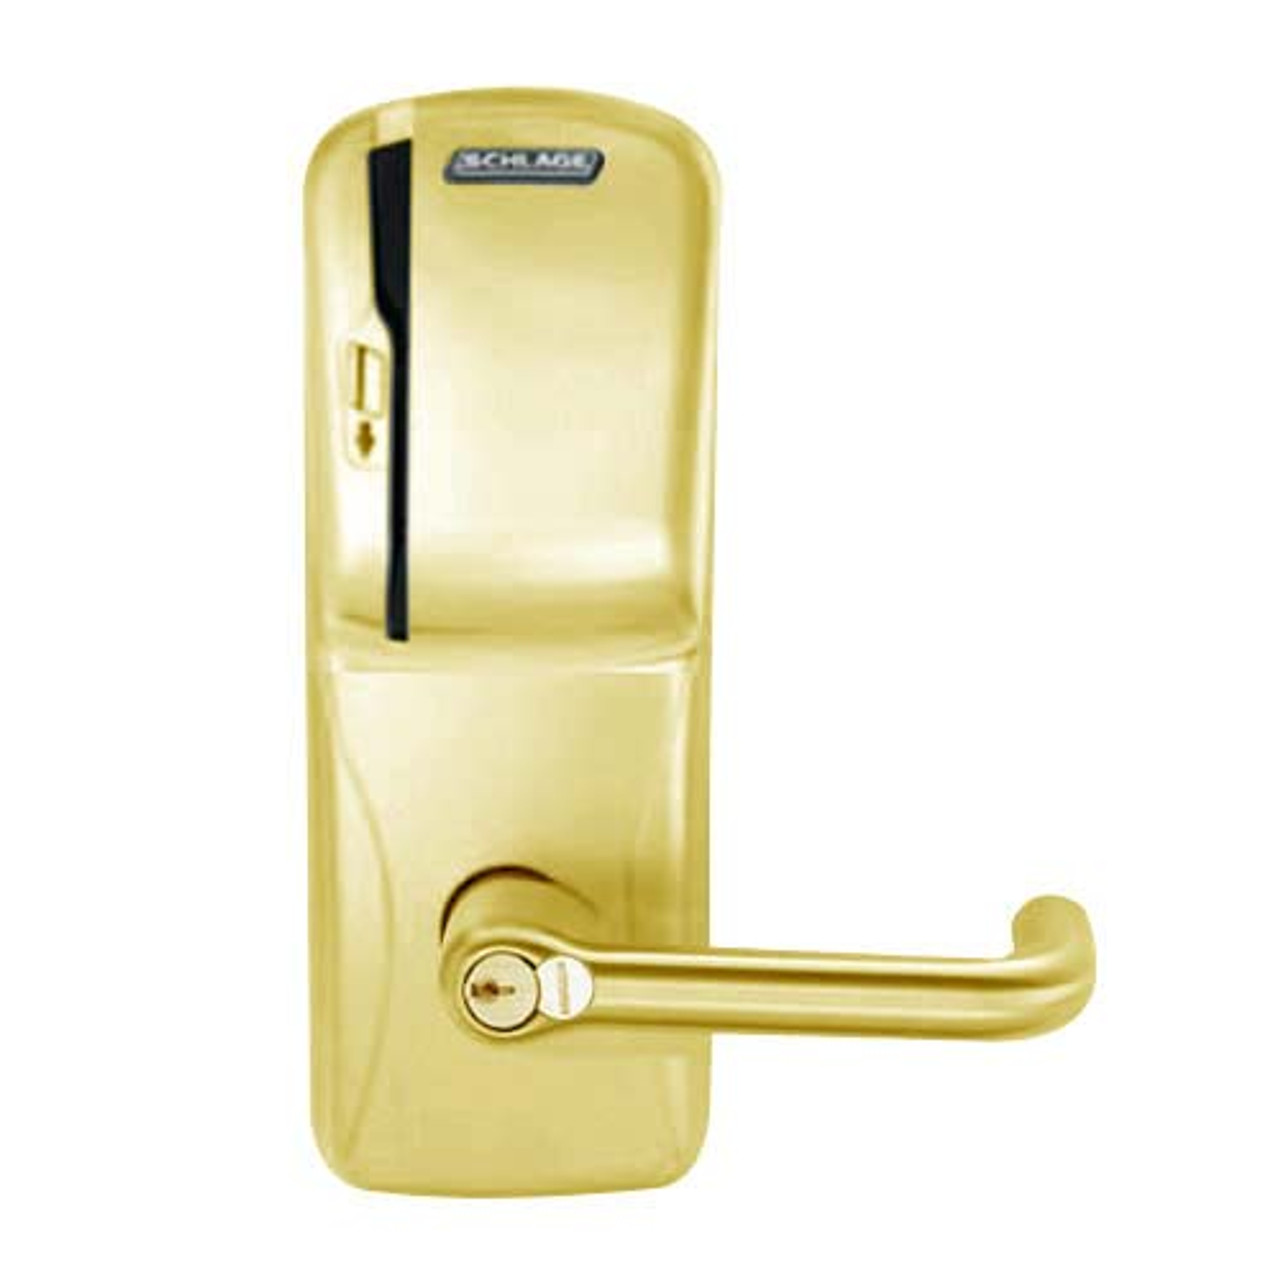 CO200-CY-70-MS-TLR-RD-605 Schlage Standalone Cylindrical Electronic Magnetic Stripe Reader Locks in Bright Brass